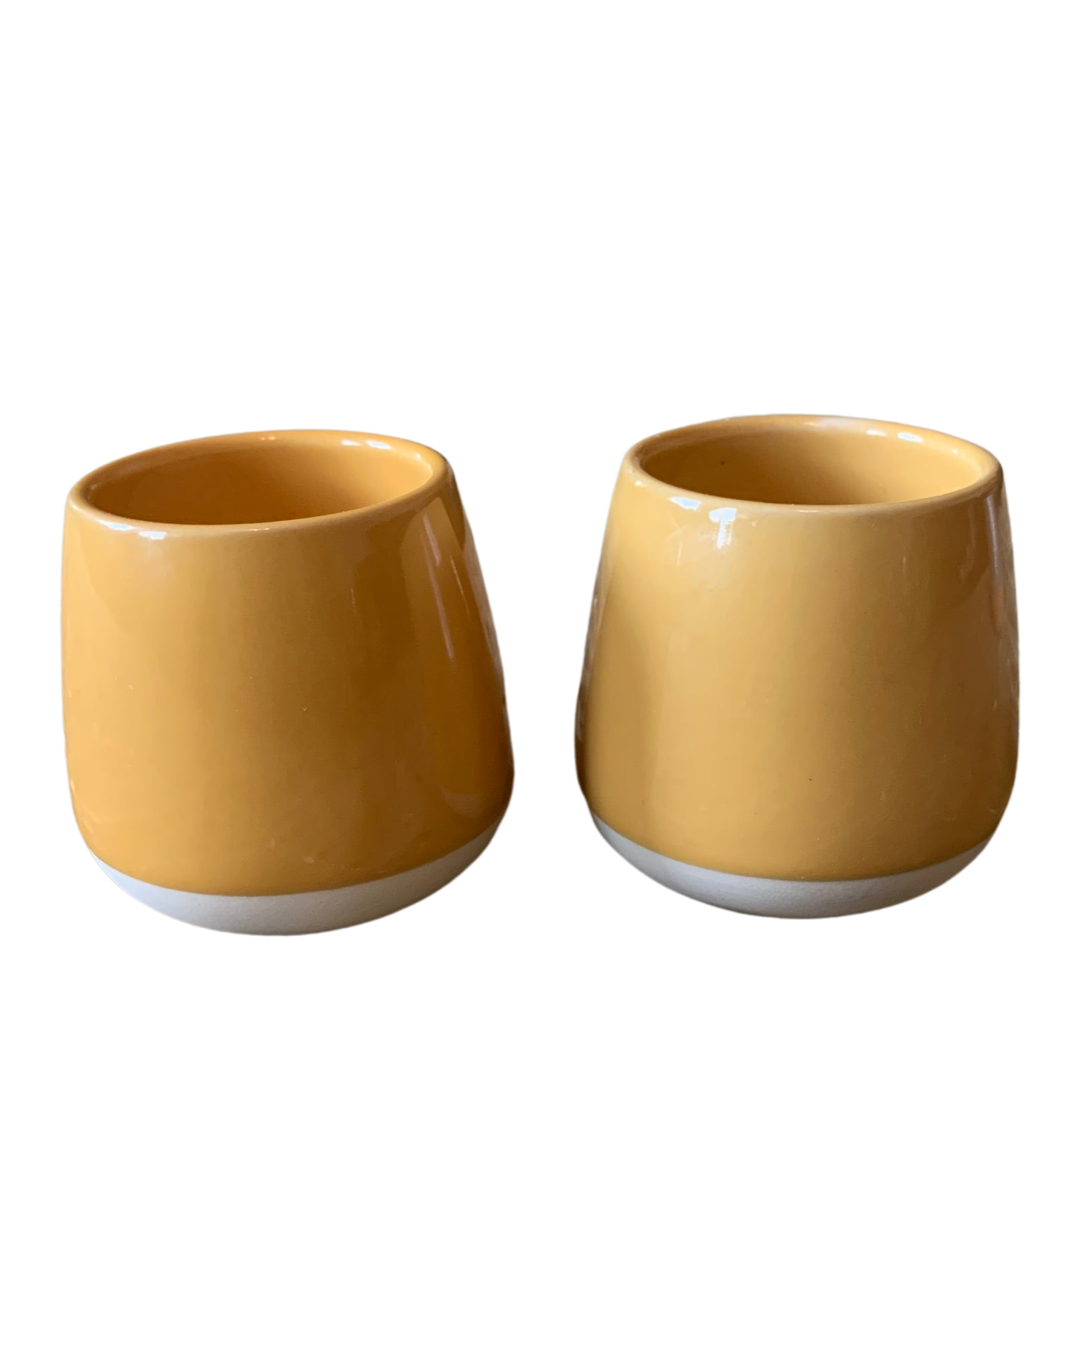 Two-Toned Ceramic Candle Set with Natural Clay Bottom, Orange or Yellow Scented Candles